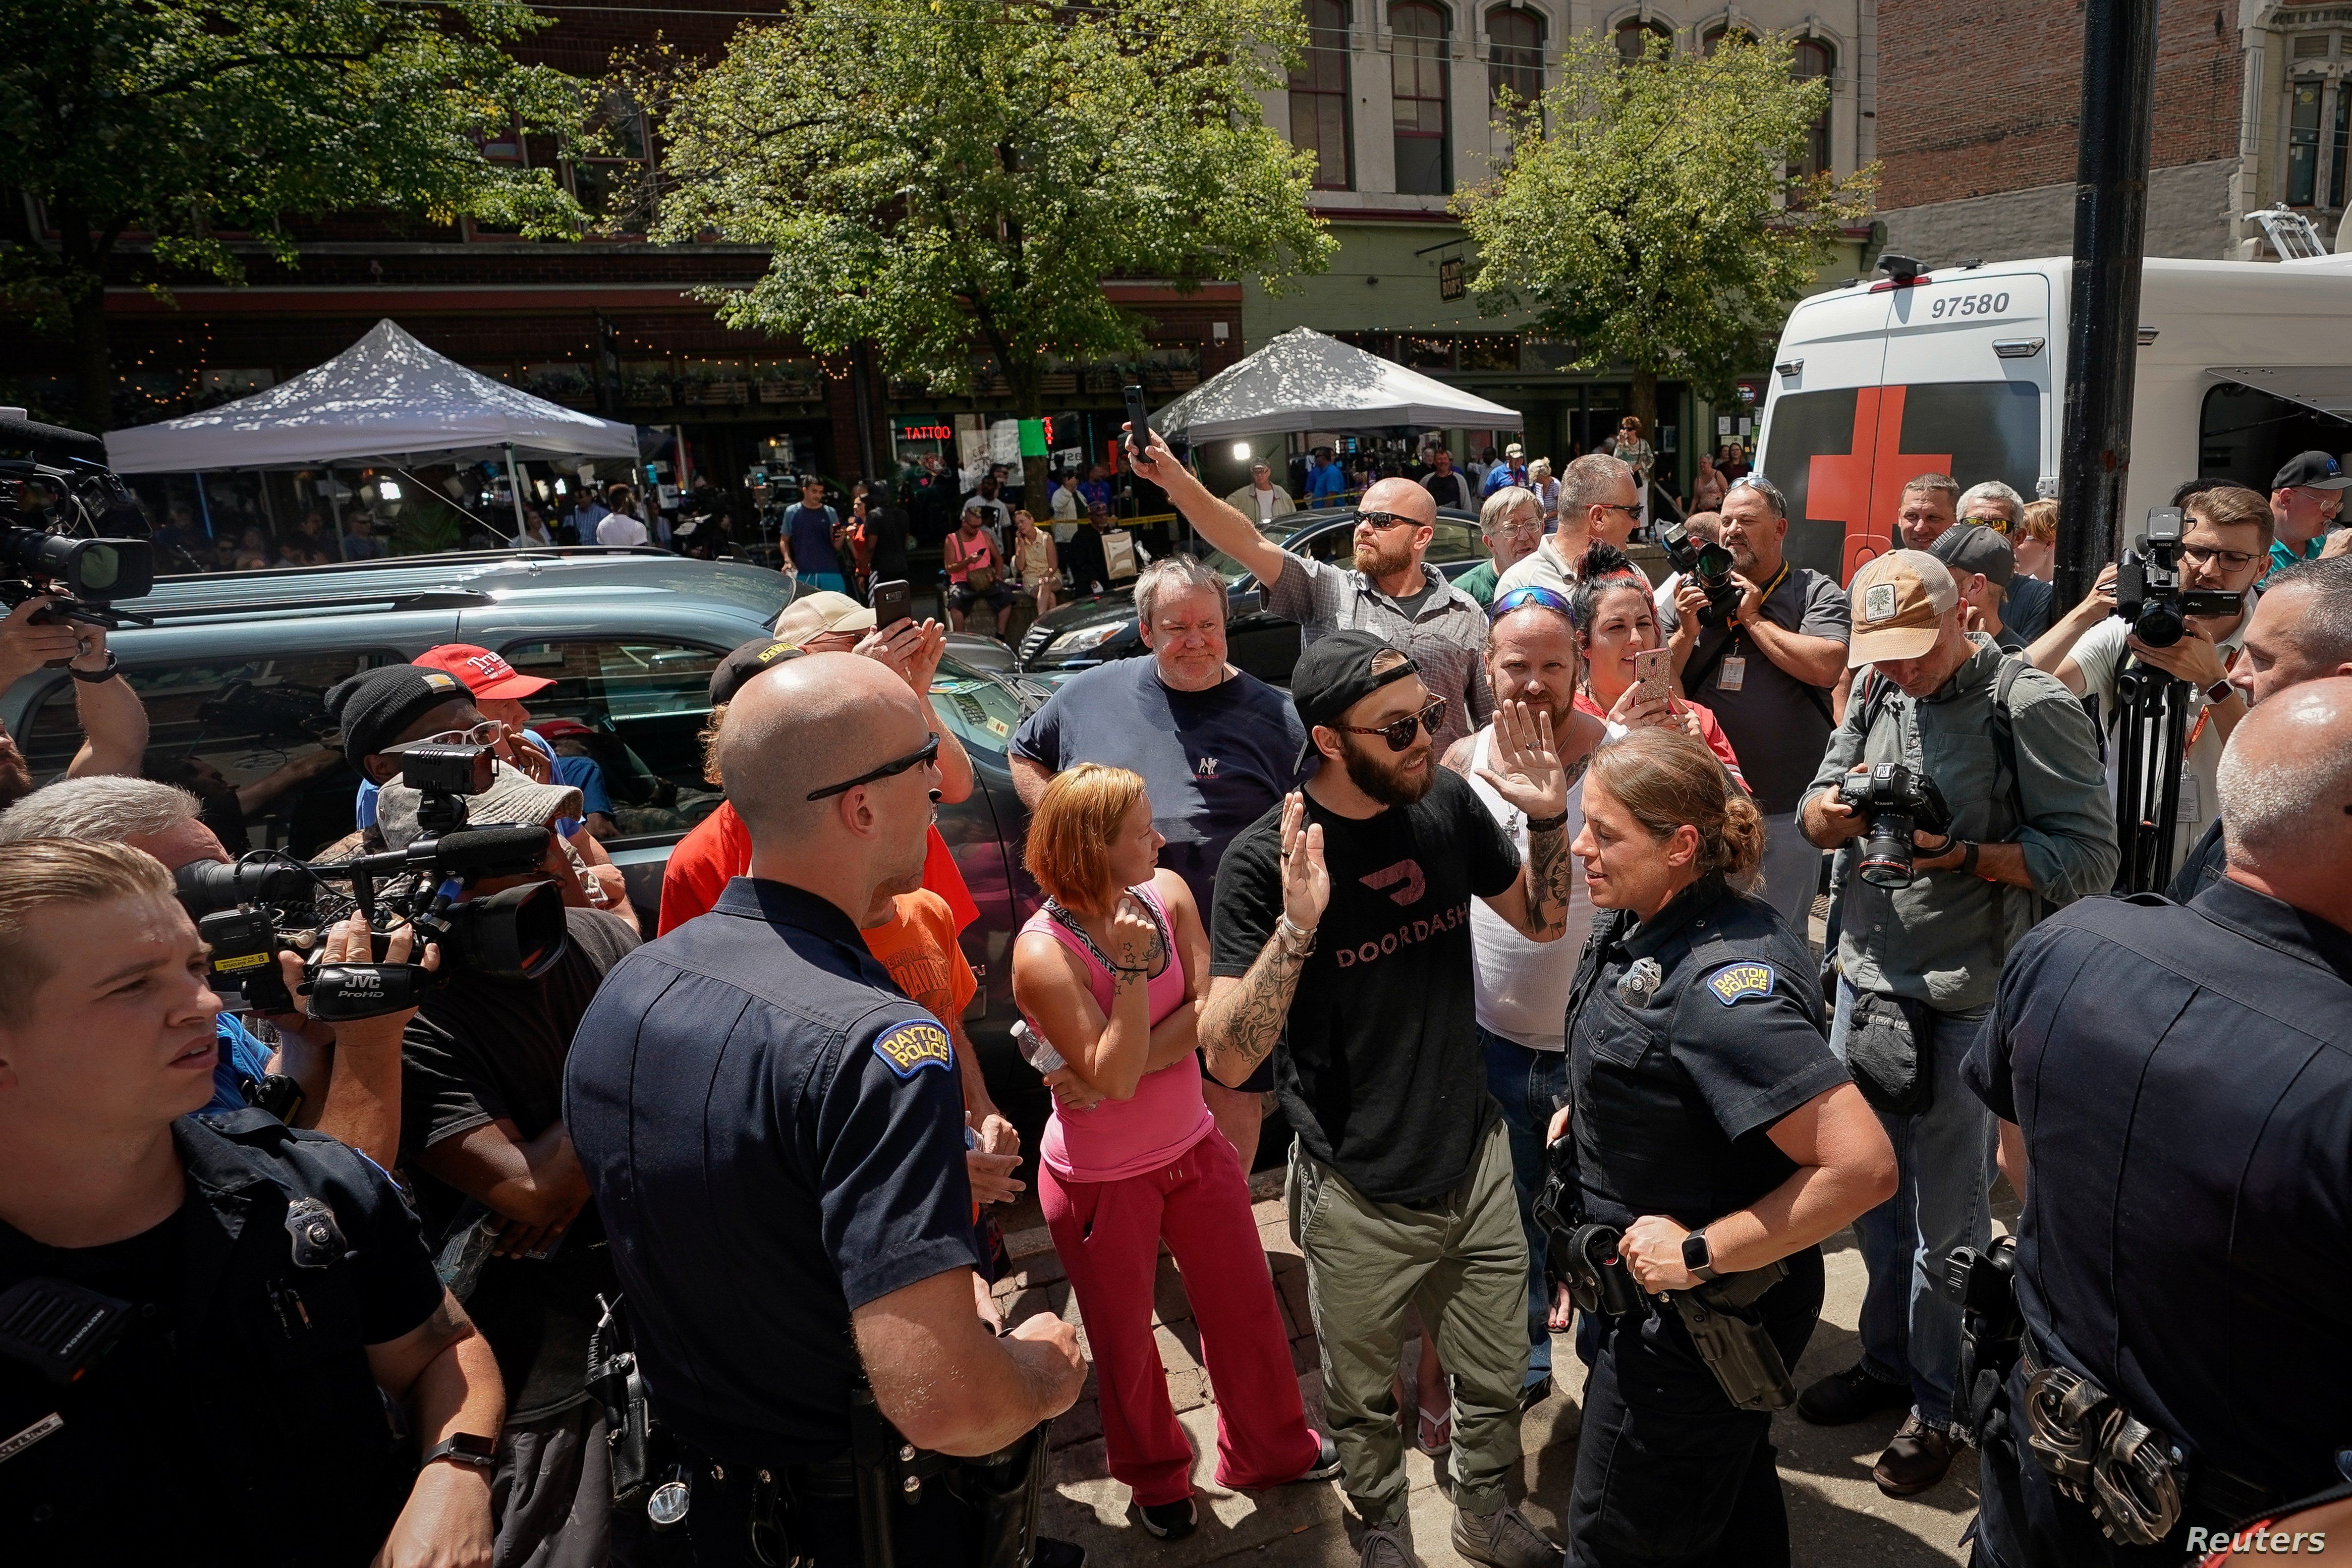 Police separate supporters of U.S. President Donald Trump from those who are opposed to the president during an argument near the site of a mass shooting in Dayton